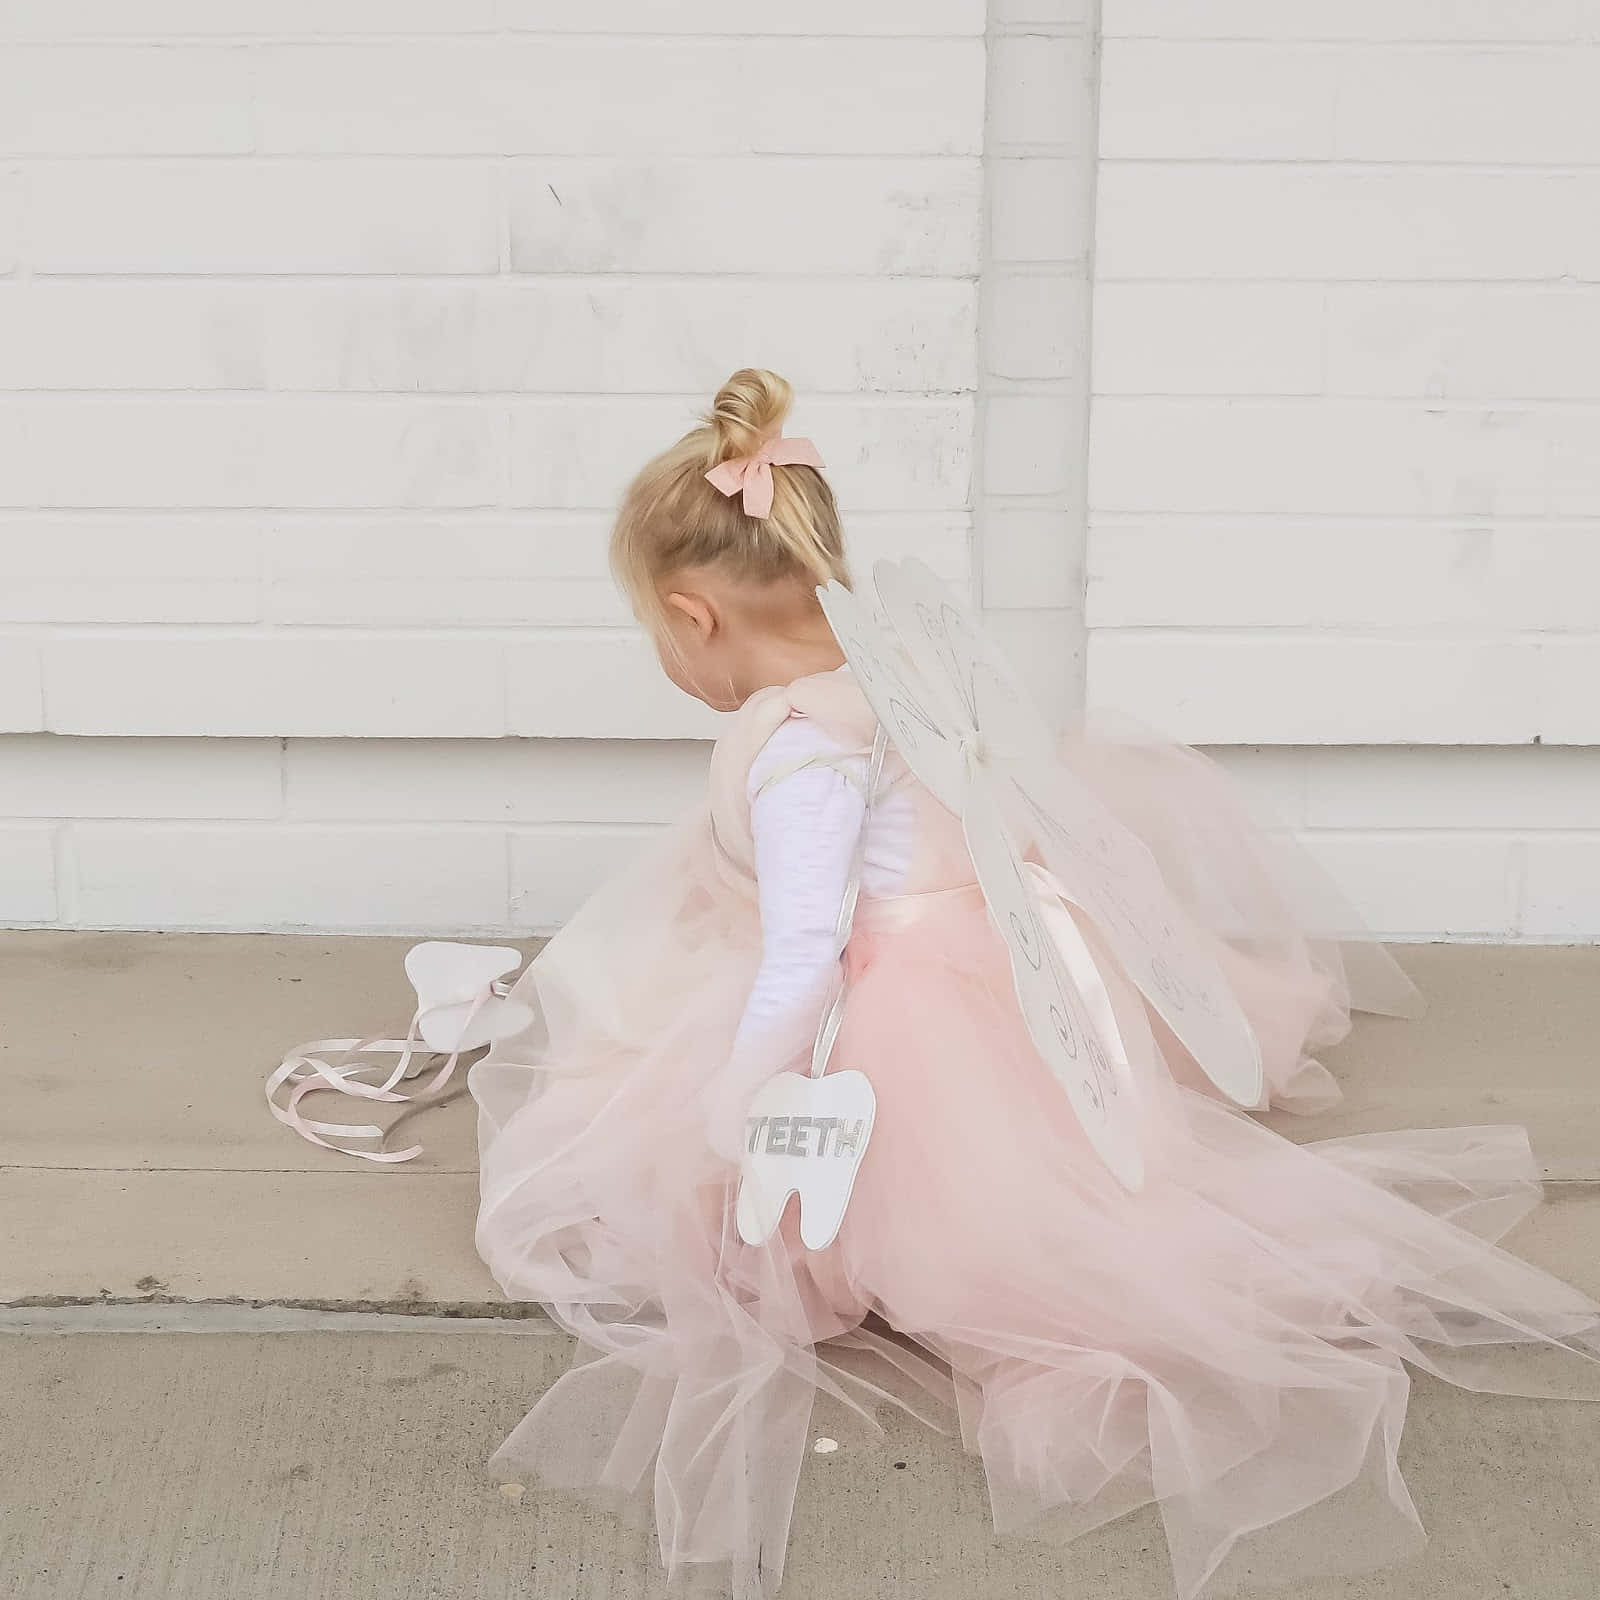 A Little Girl Dressed Up In A Pink Tutu